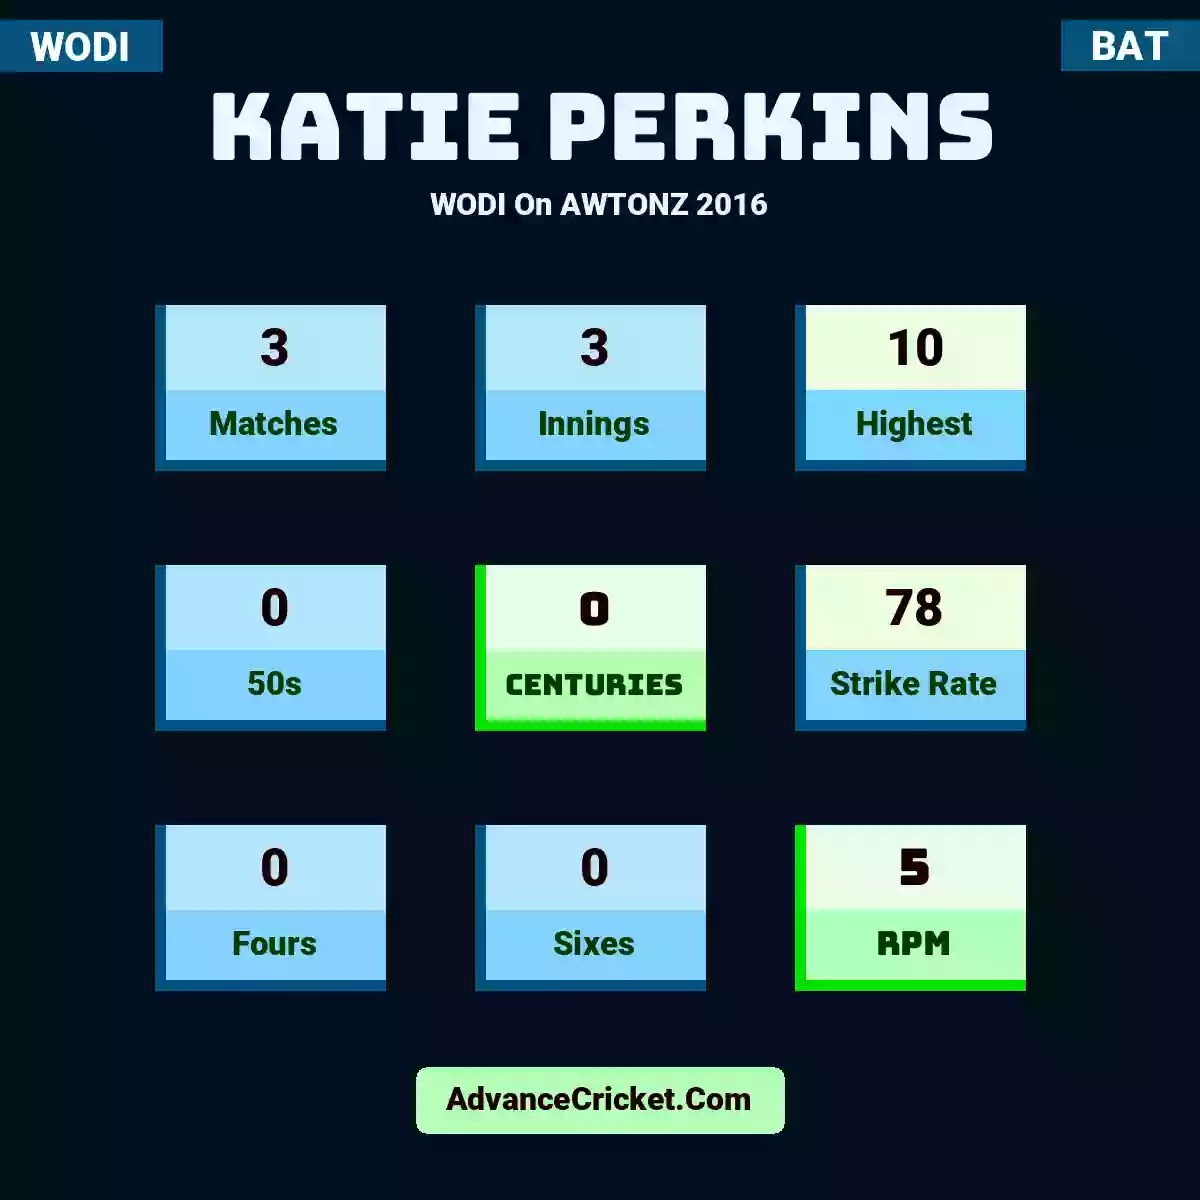 Katie Perkins WODI  On AWTONZ 2016, Katie Perkins played 3 matches, scored 10 runs as highest, 0 half-centuries, and 0 centuries, with a strike rate of 78. K.Perkins hit 0 fours and 0 sixes, with an RPM of 5.